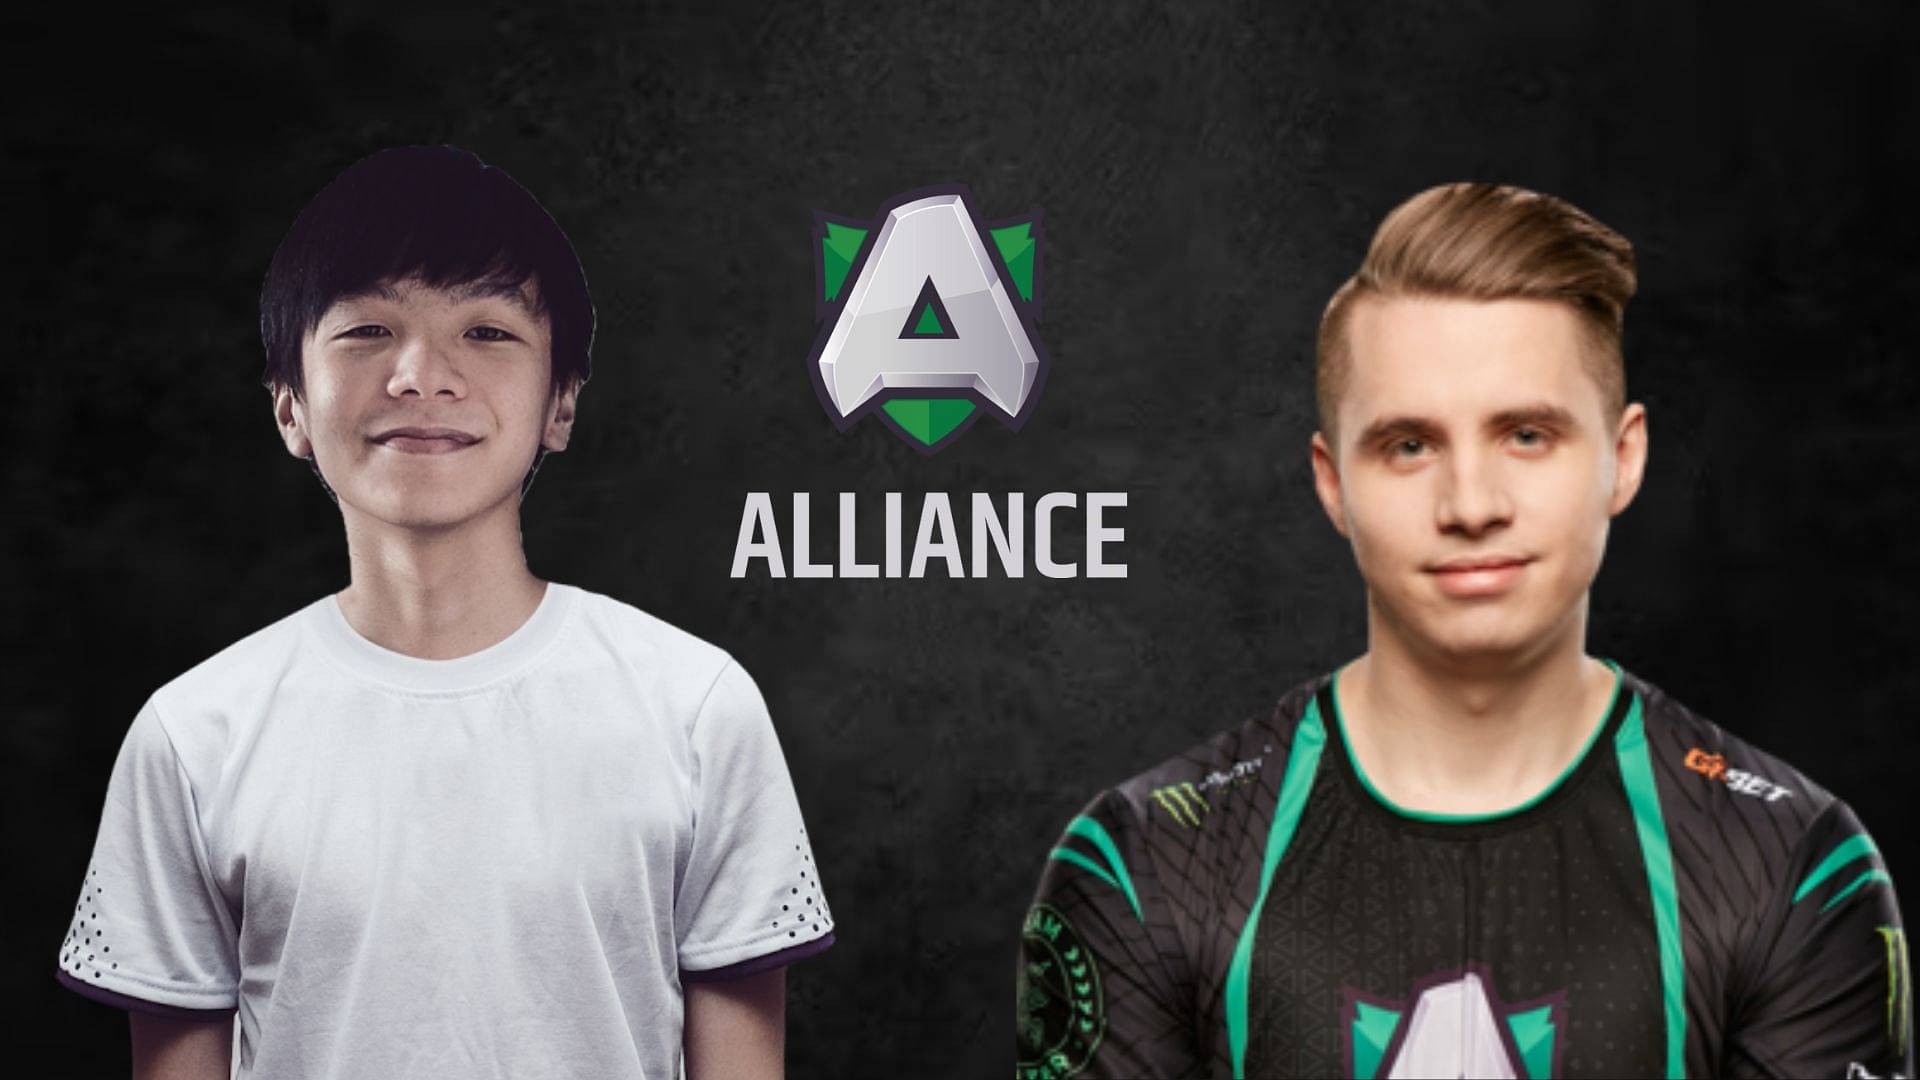 An illustration featuring ponlo and Handsken with the Alliance logo